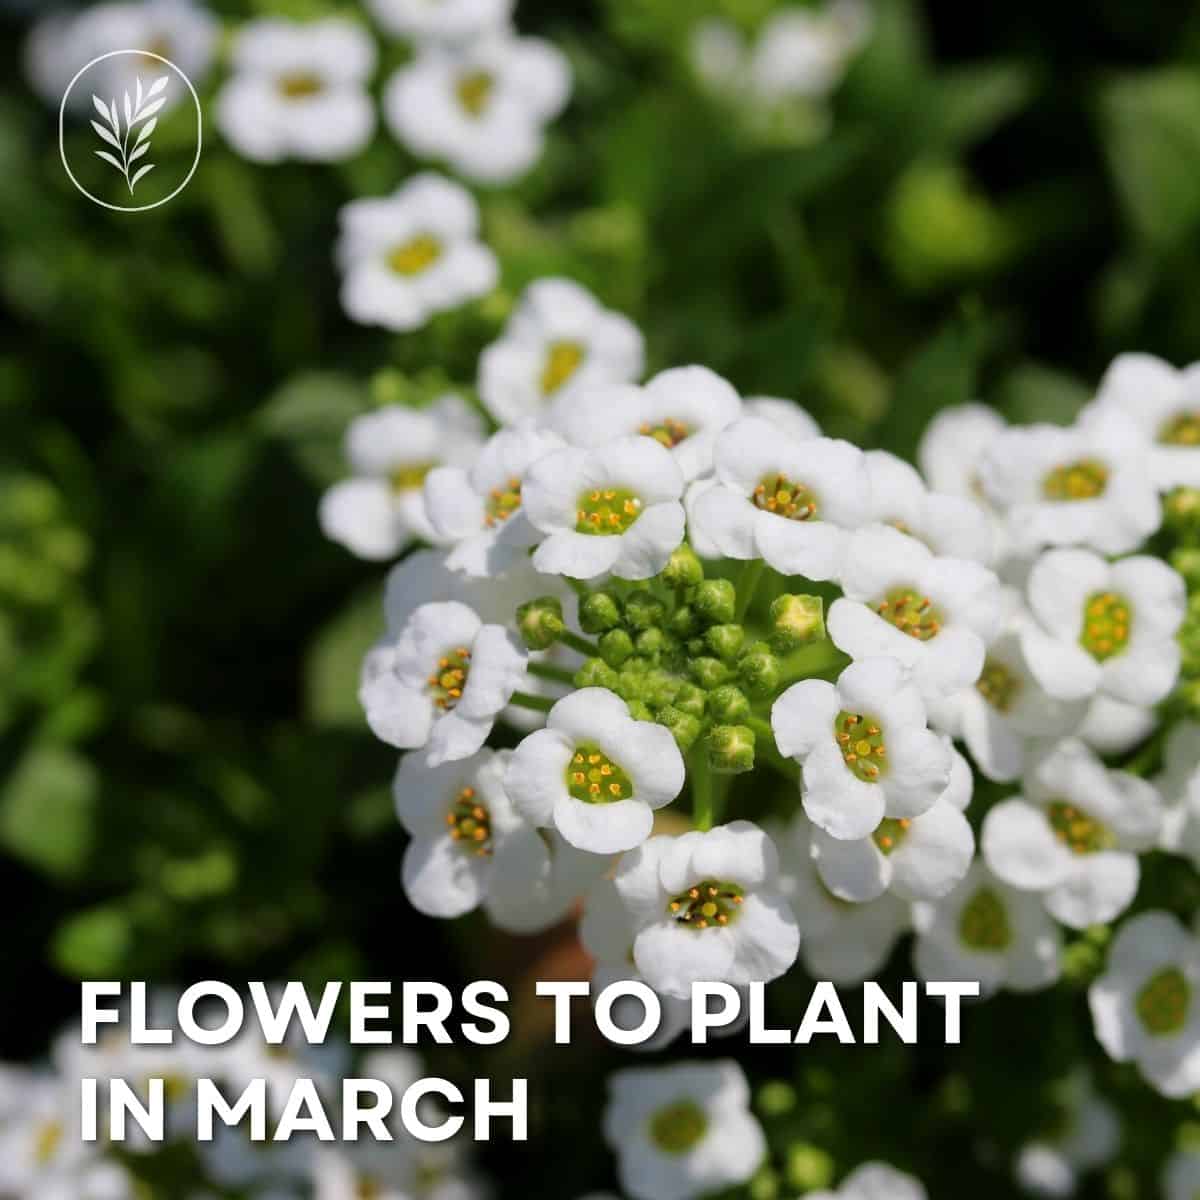 Flowers to plant in march via @home4theharvest